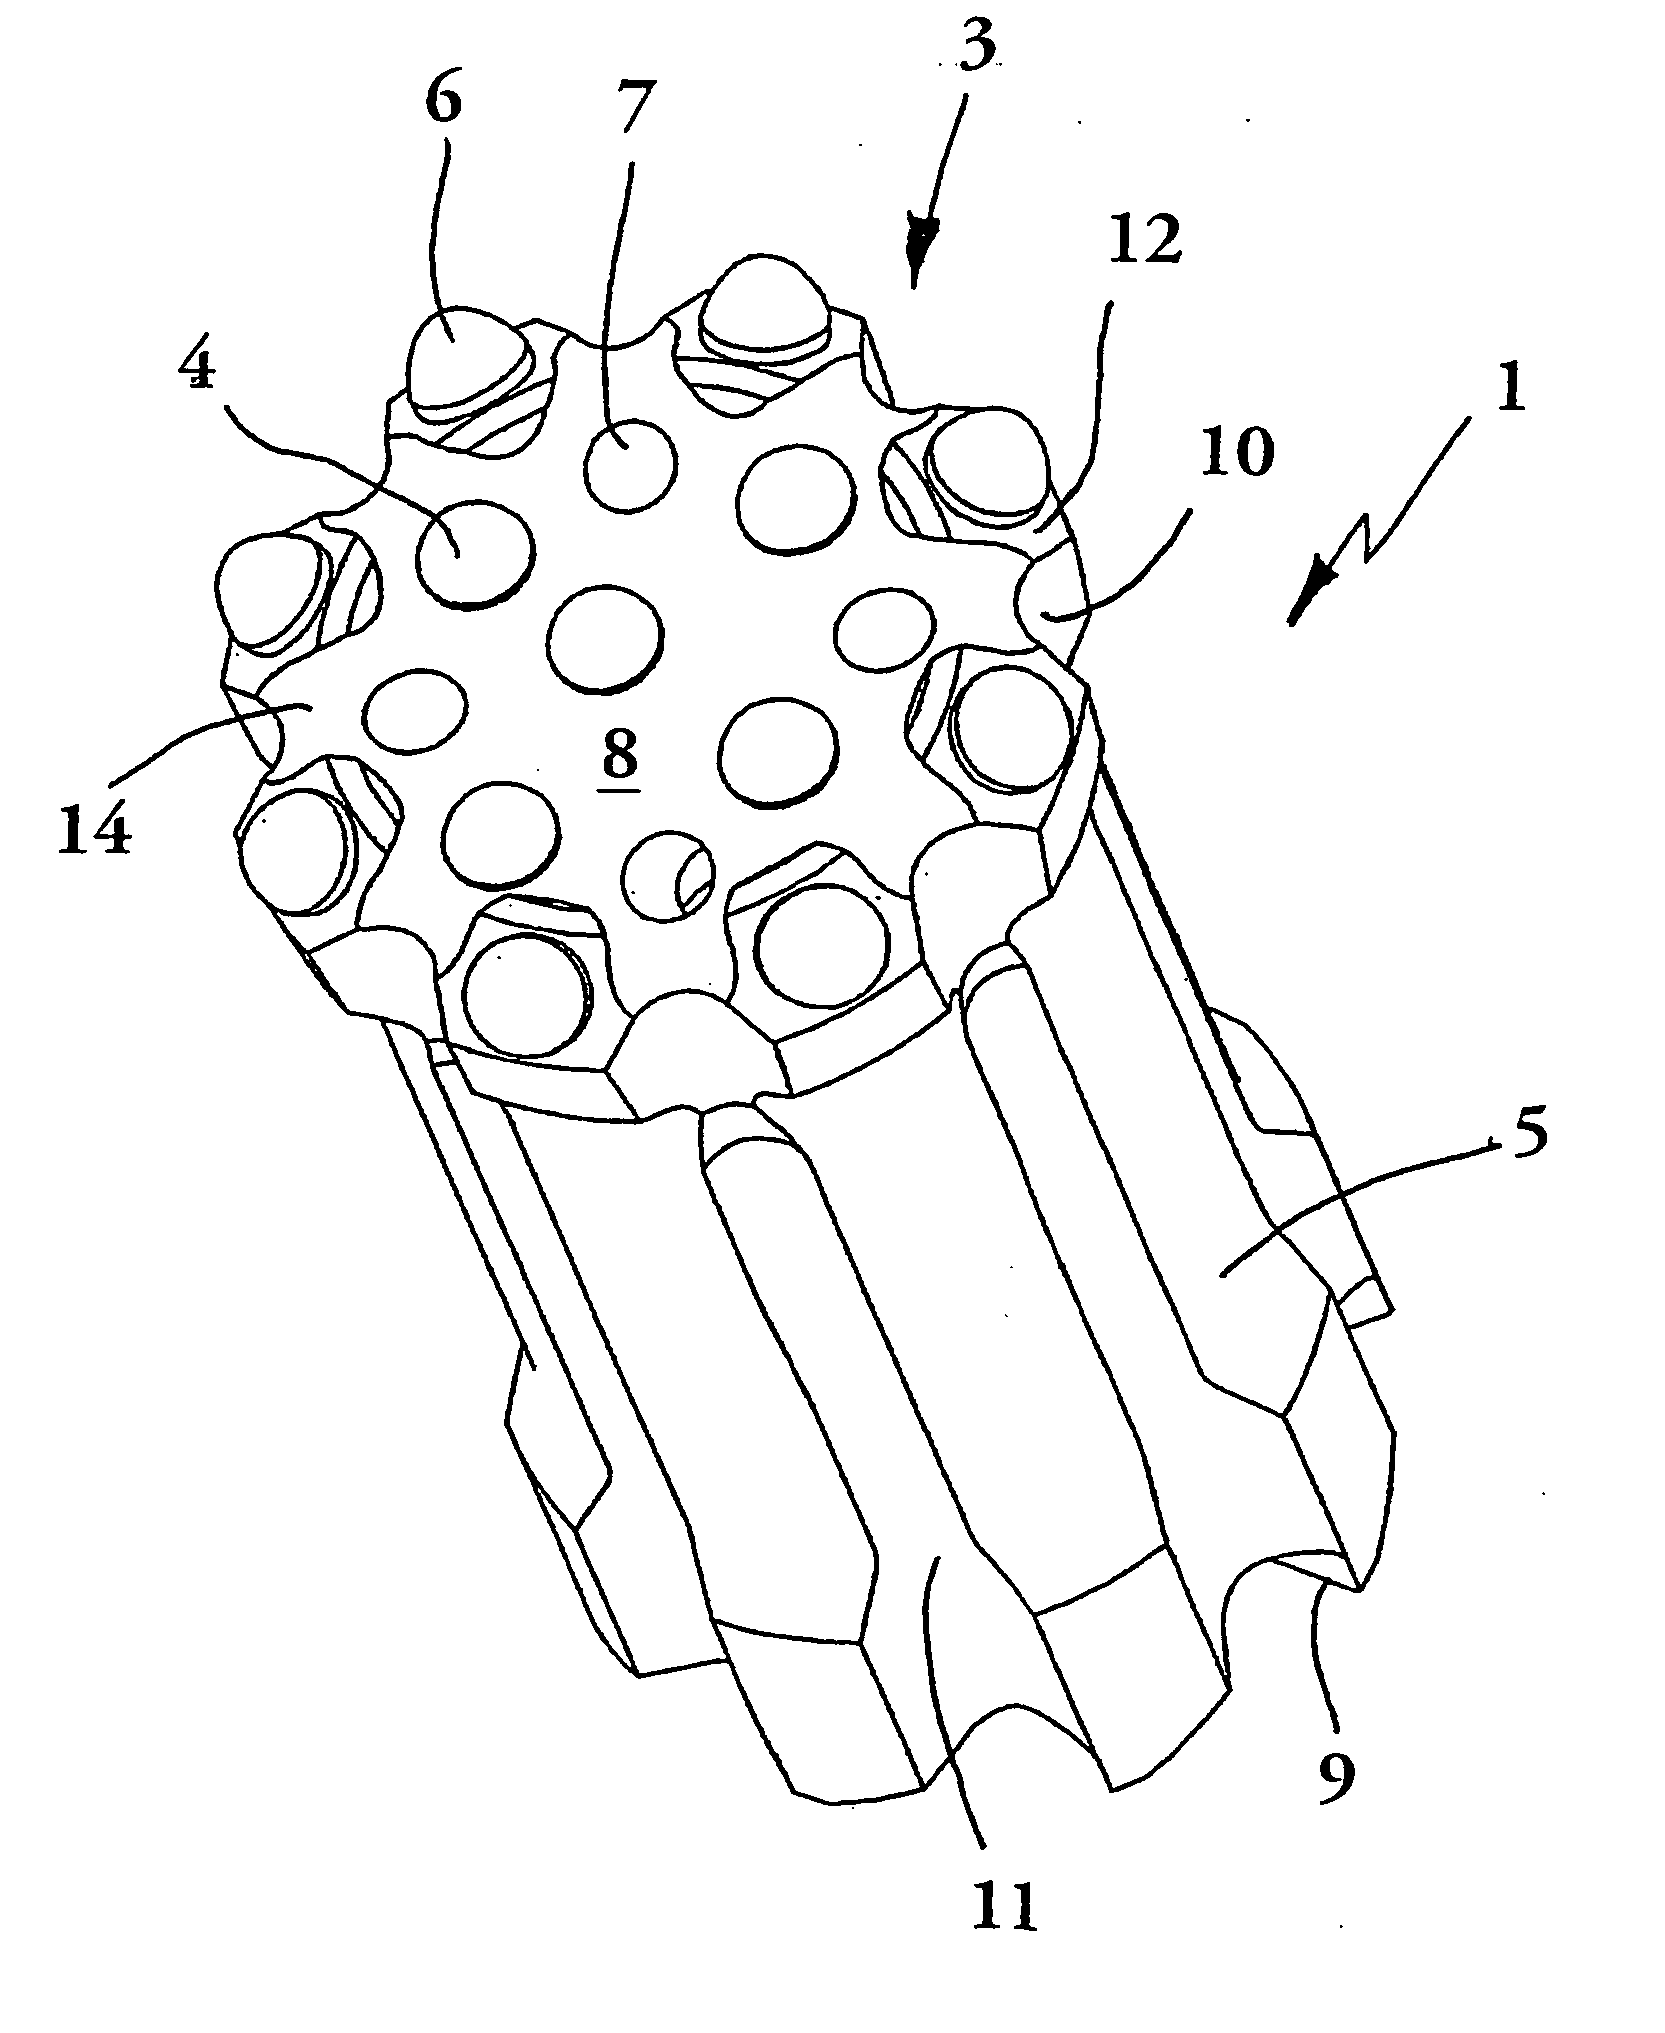 Rock drill bit having outer and inner rock-crushing buttons